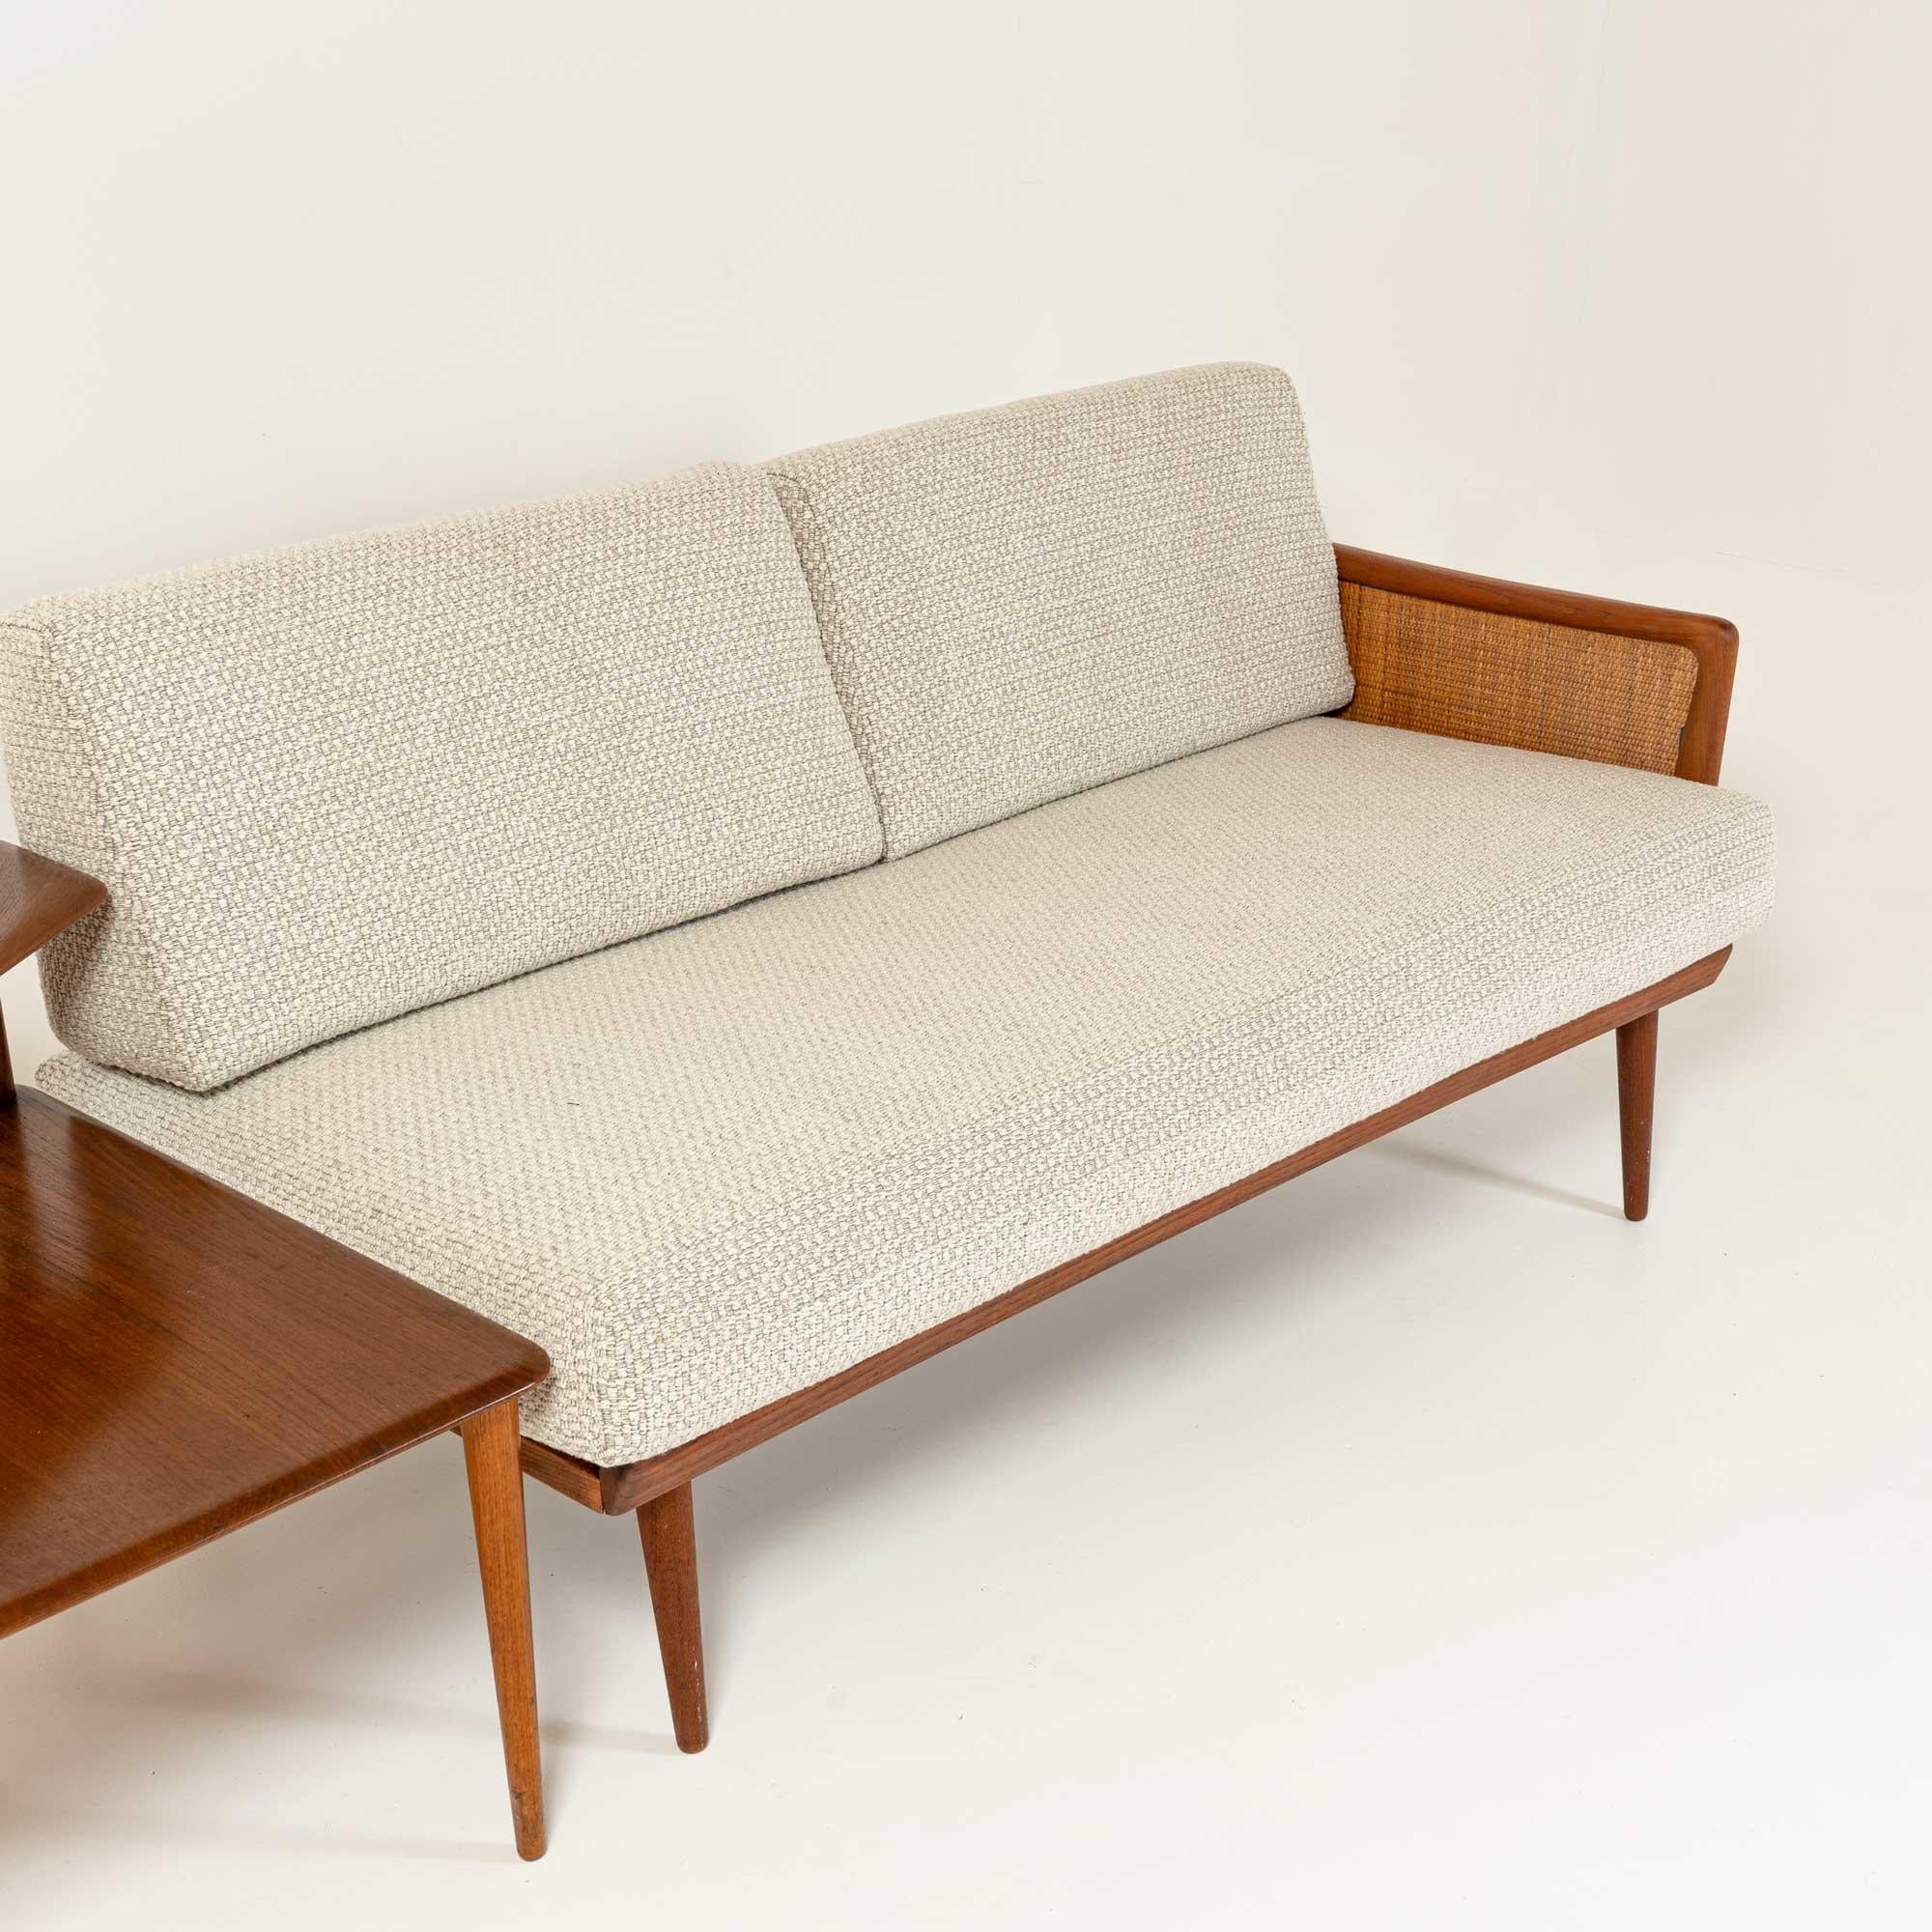 Mid-20th Century Peter Hvidt Model FD 451 Sectional sofas Daybed in Teak and Salt & Pepper Bouclé